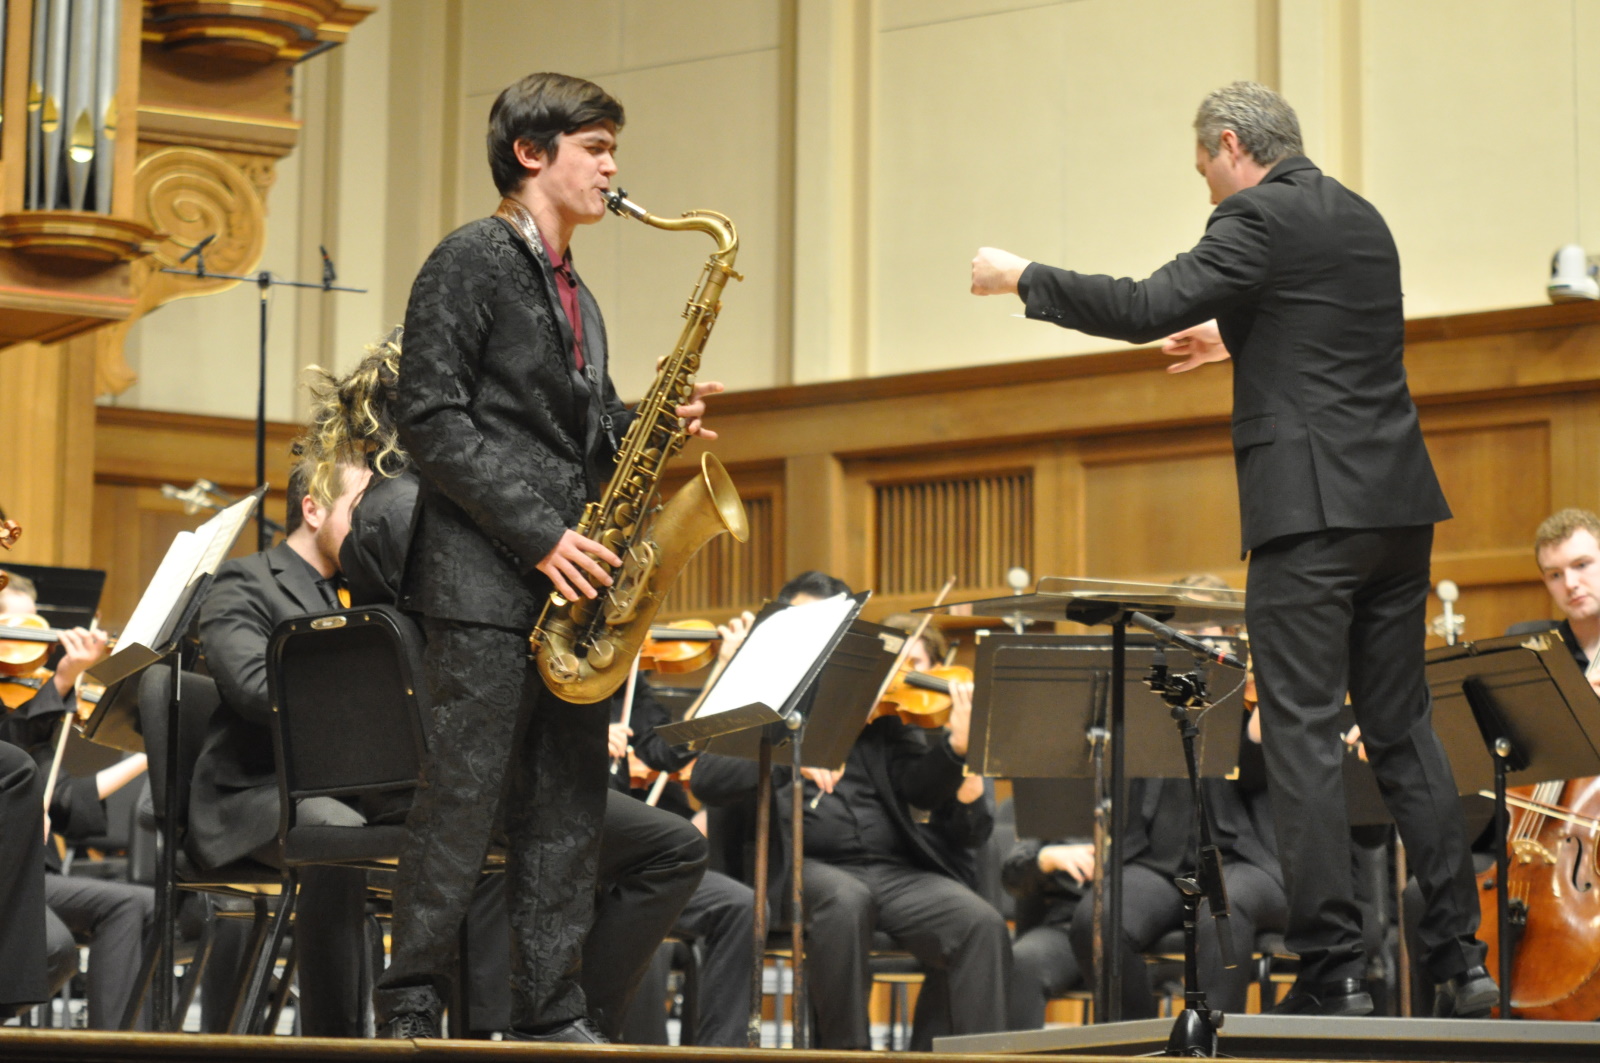 Jasper Kashou performs his composition along with the Lawrence Symphony Orchestra during a March concert.